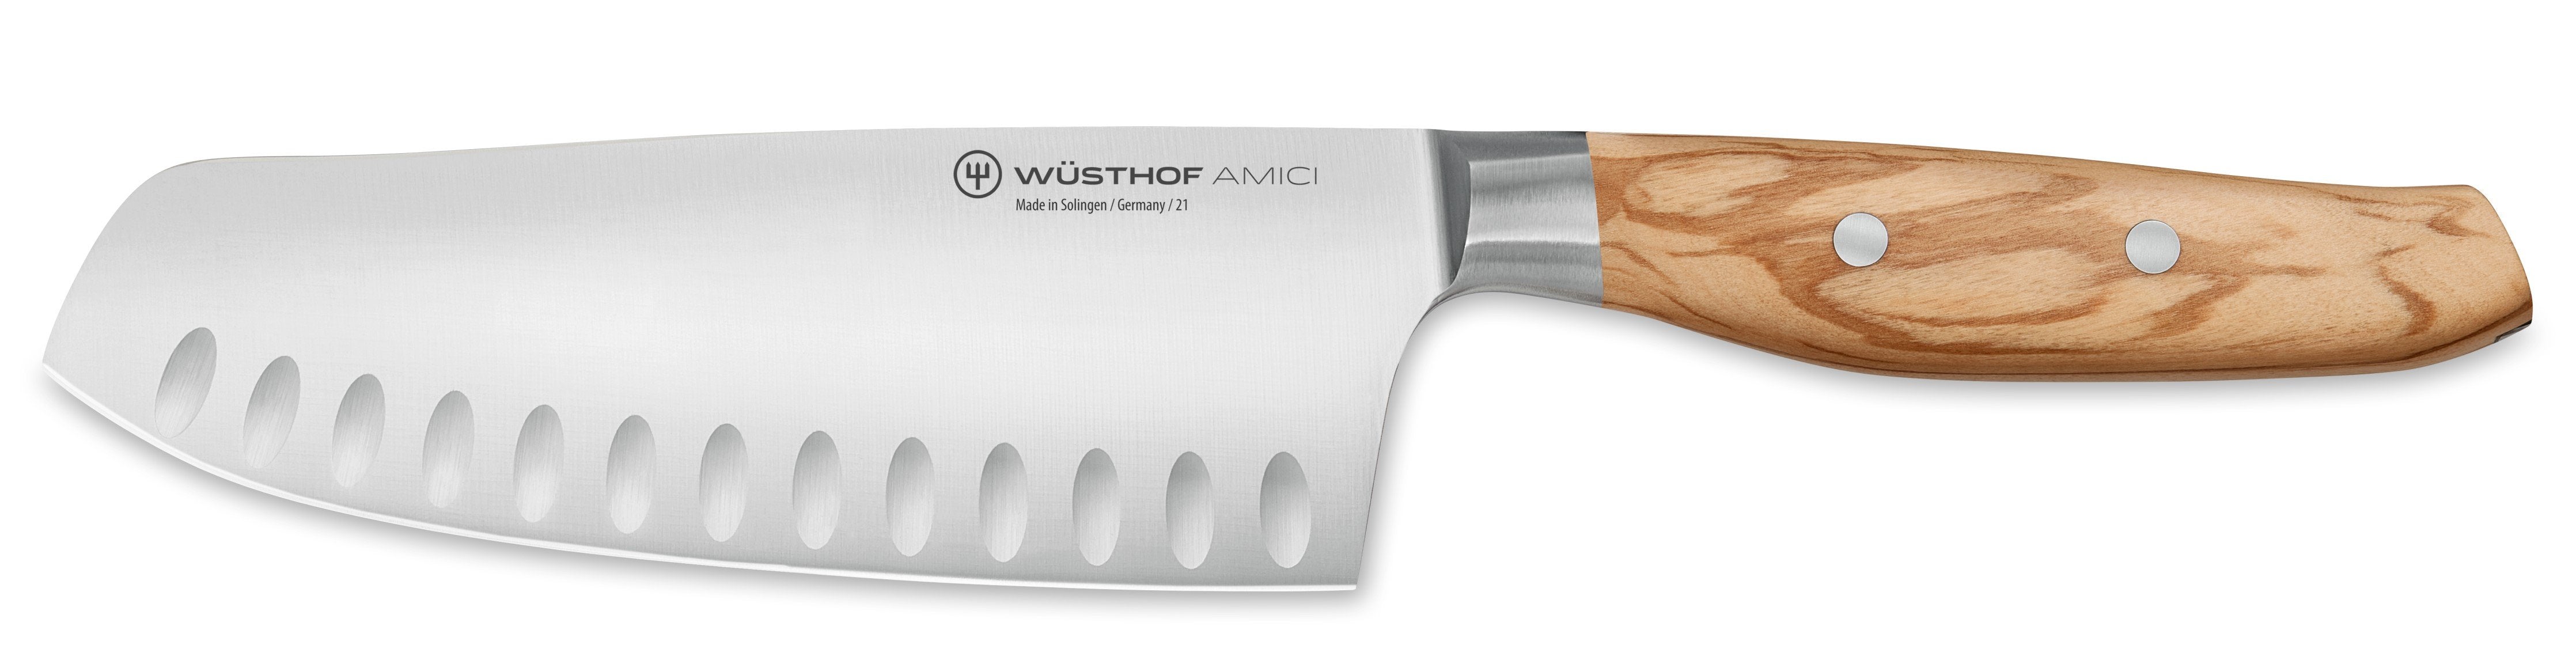 Wusthof 10-Piece Stainless Carving Steak Knife Set, Olivewood